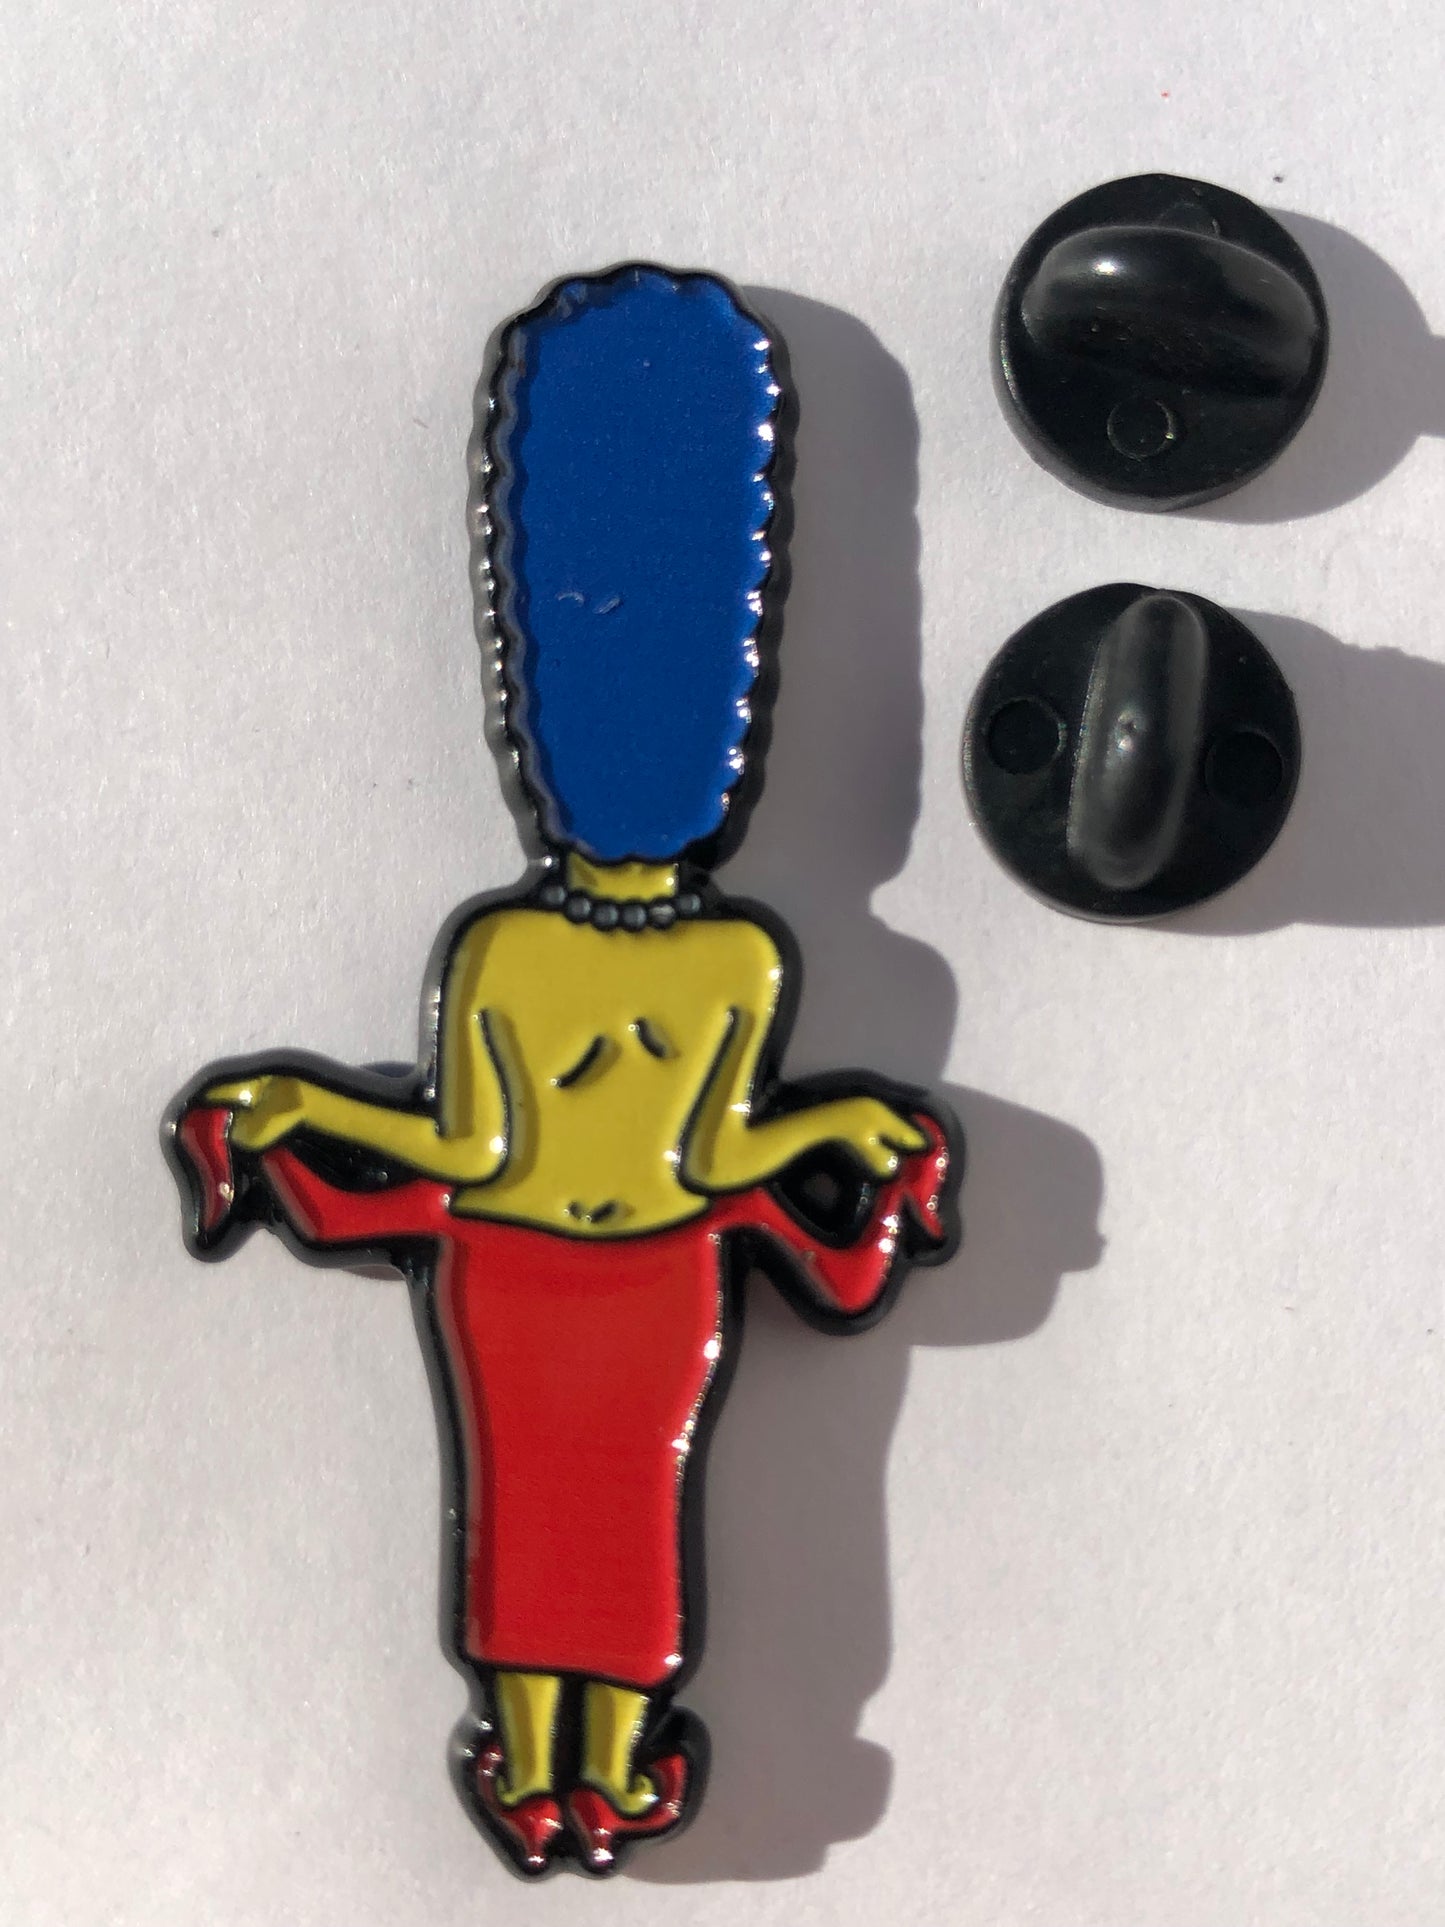 Marge undressing Pin